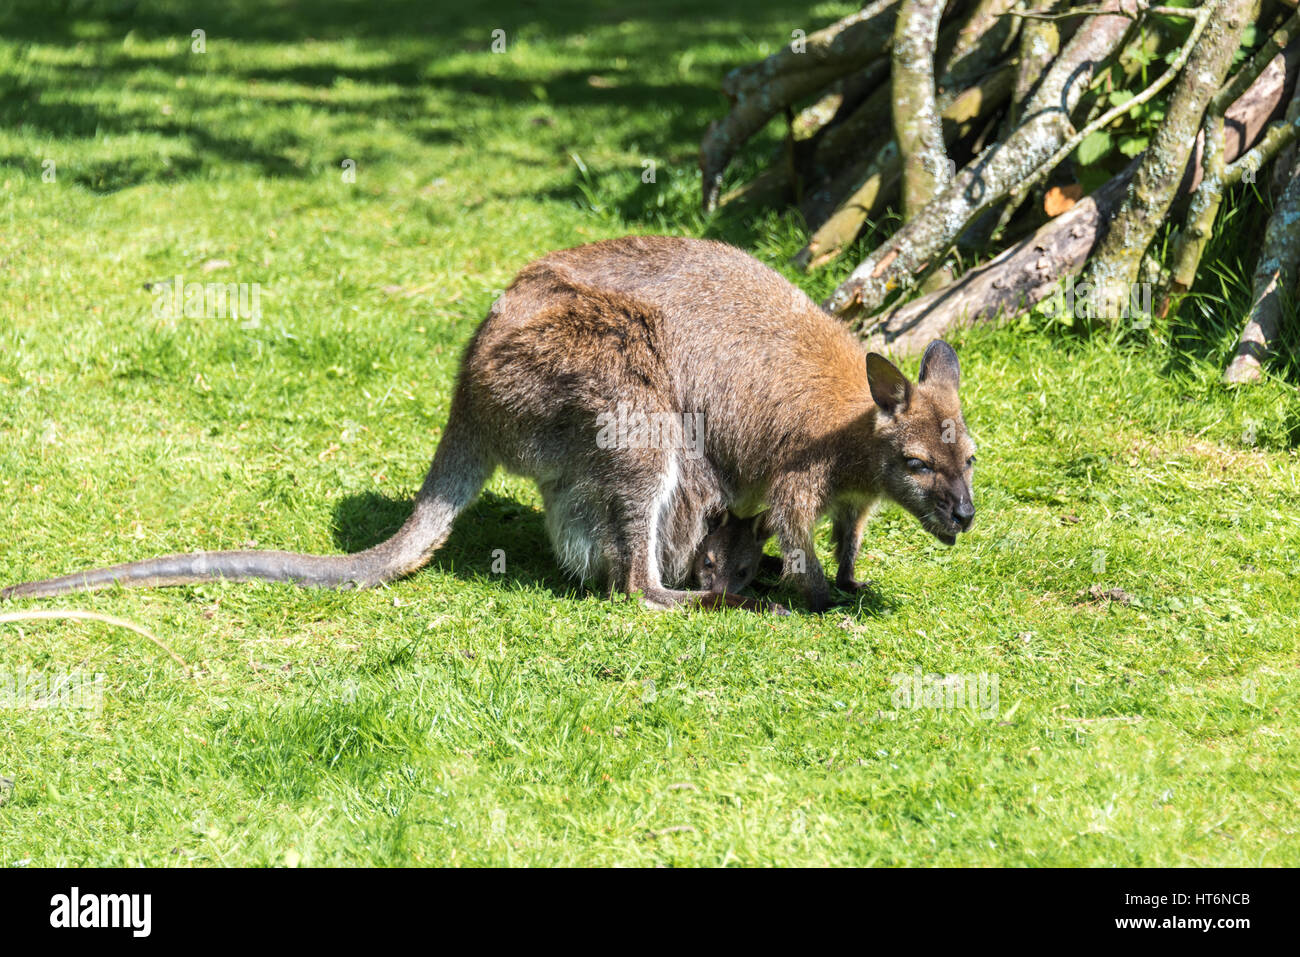 Wallaby with baby in pouch Stock Photo